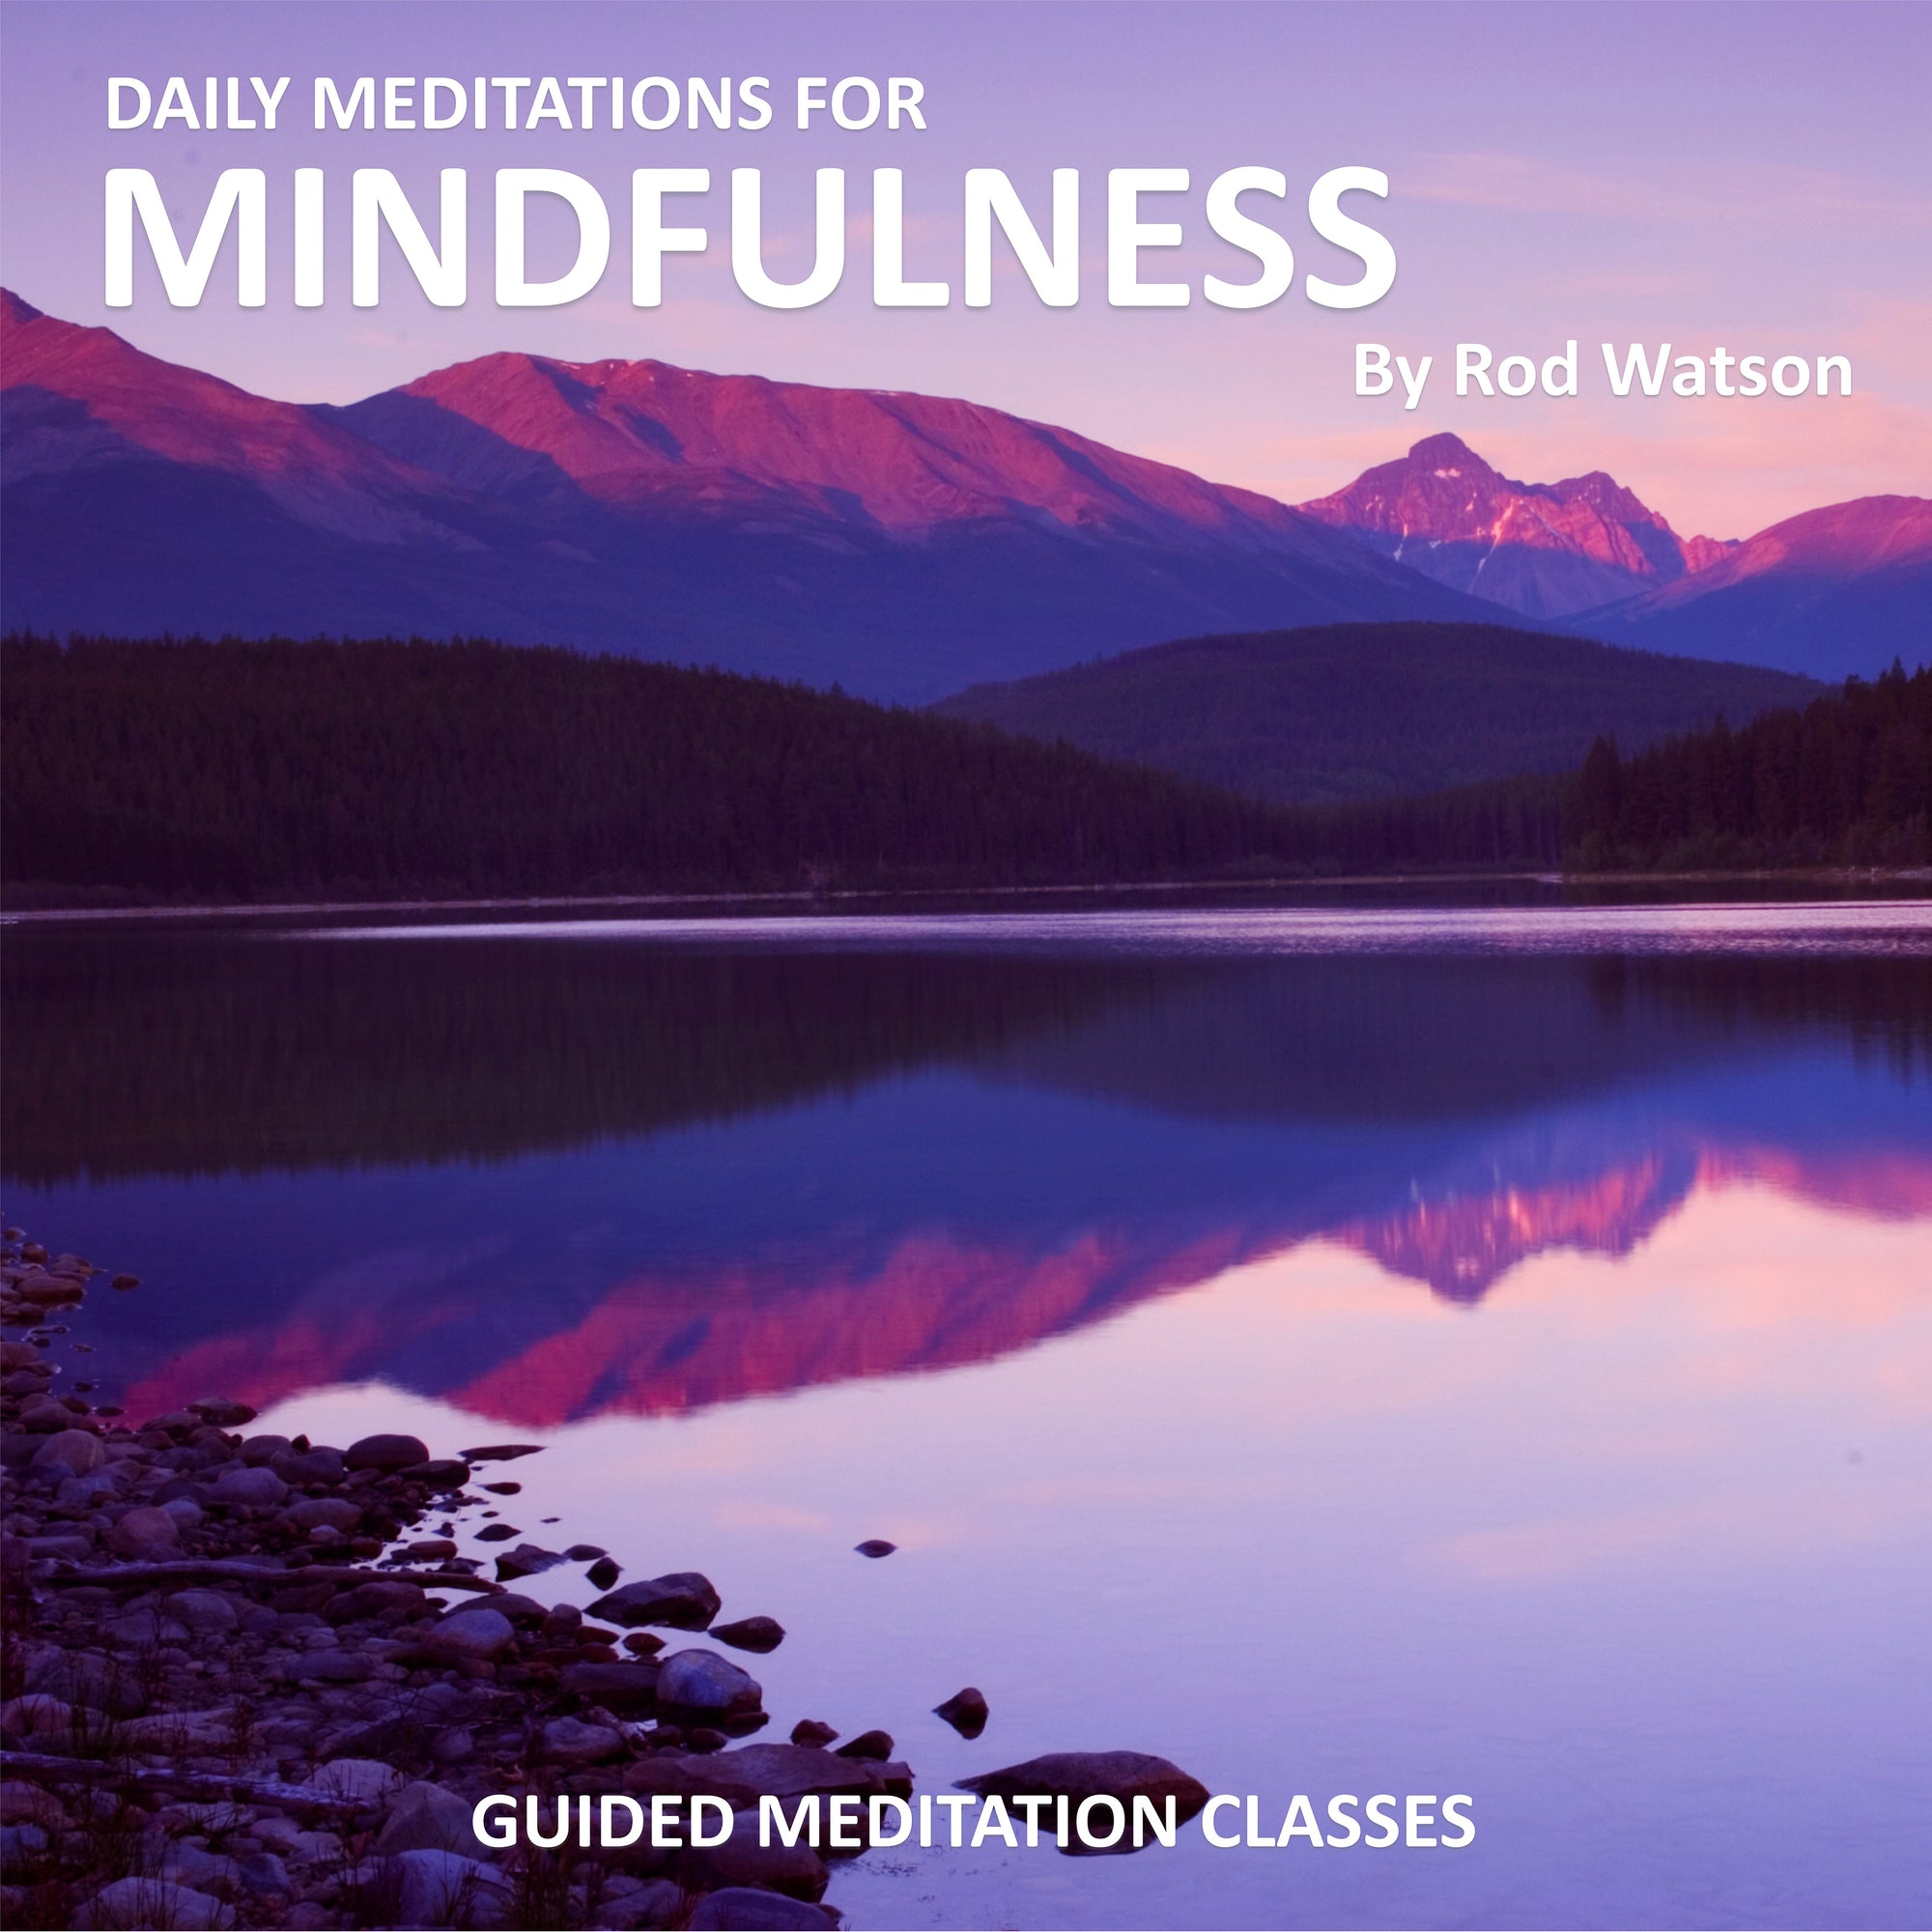 Daily Meditations for Mindfulness | Yoga 2 Hear